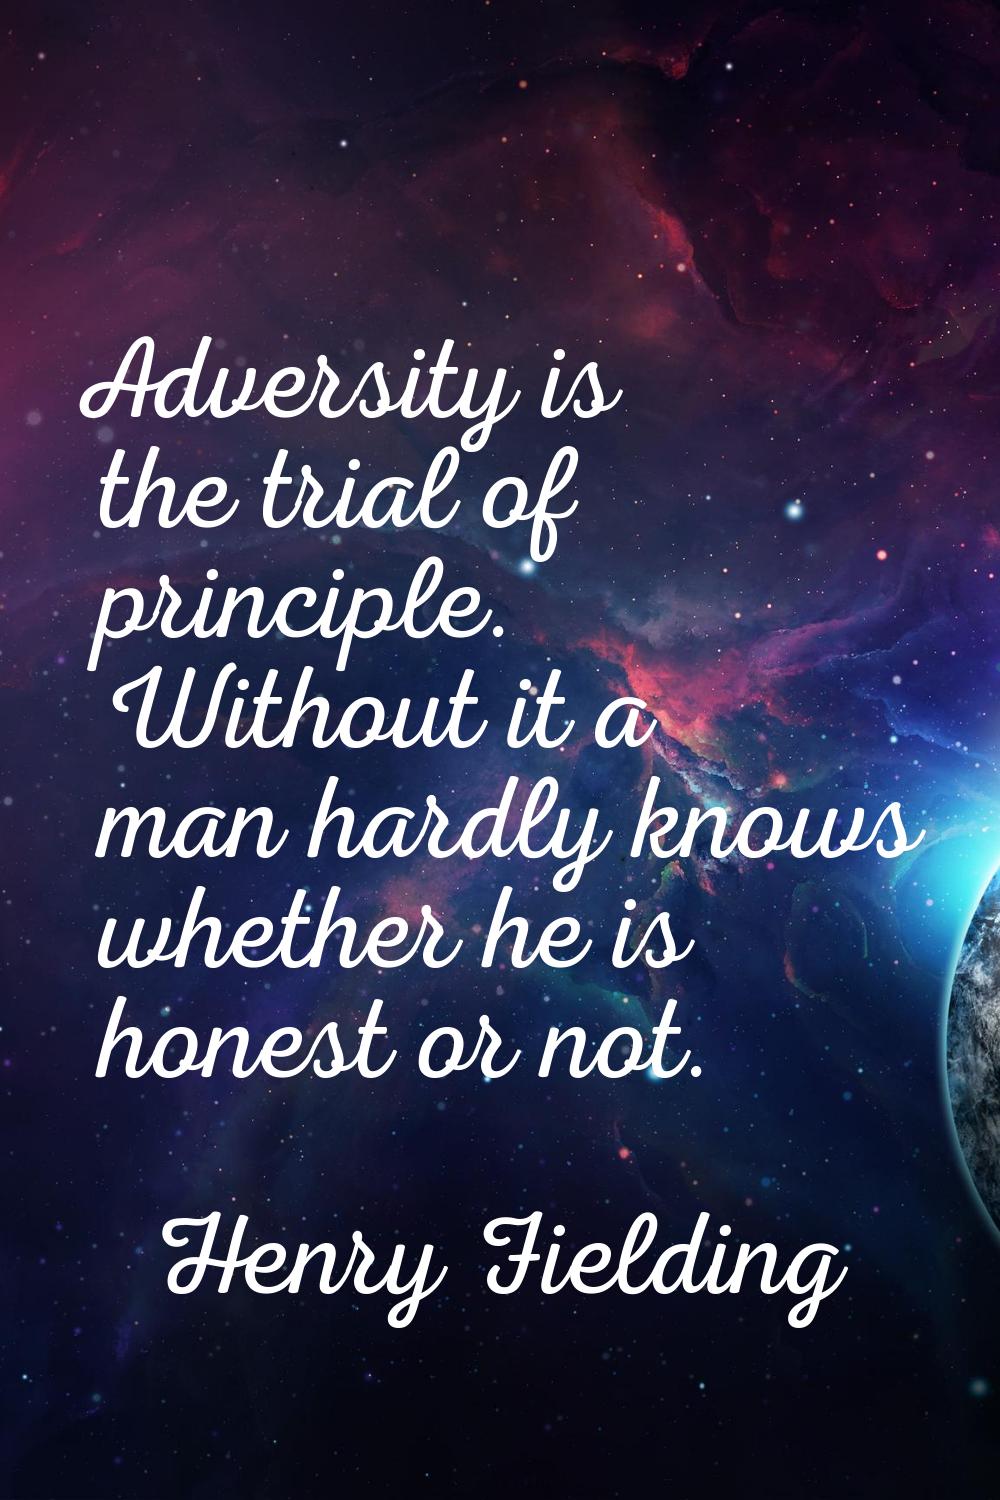 Adversity is the trial of principle. Without it a man hardly knows whether he is honest or not.